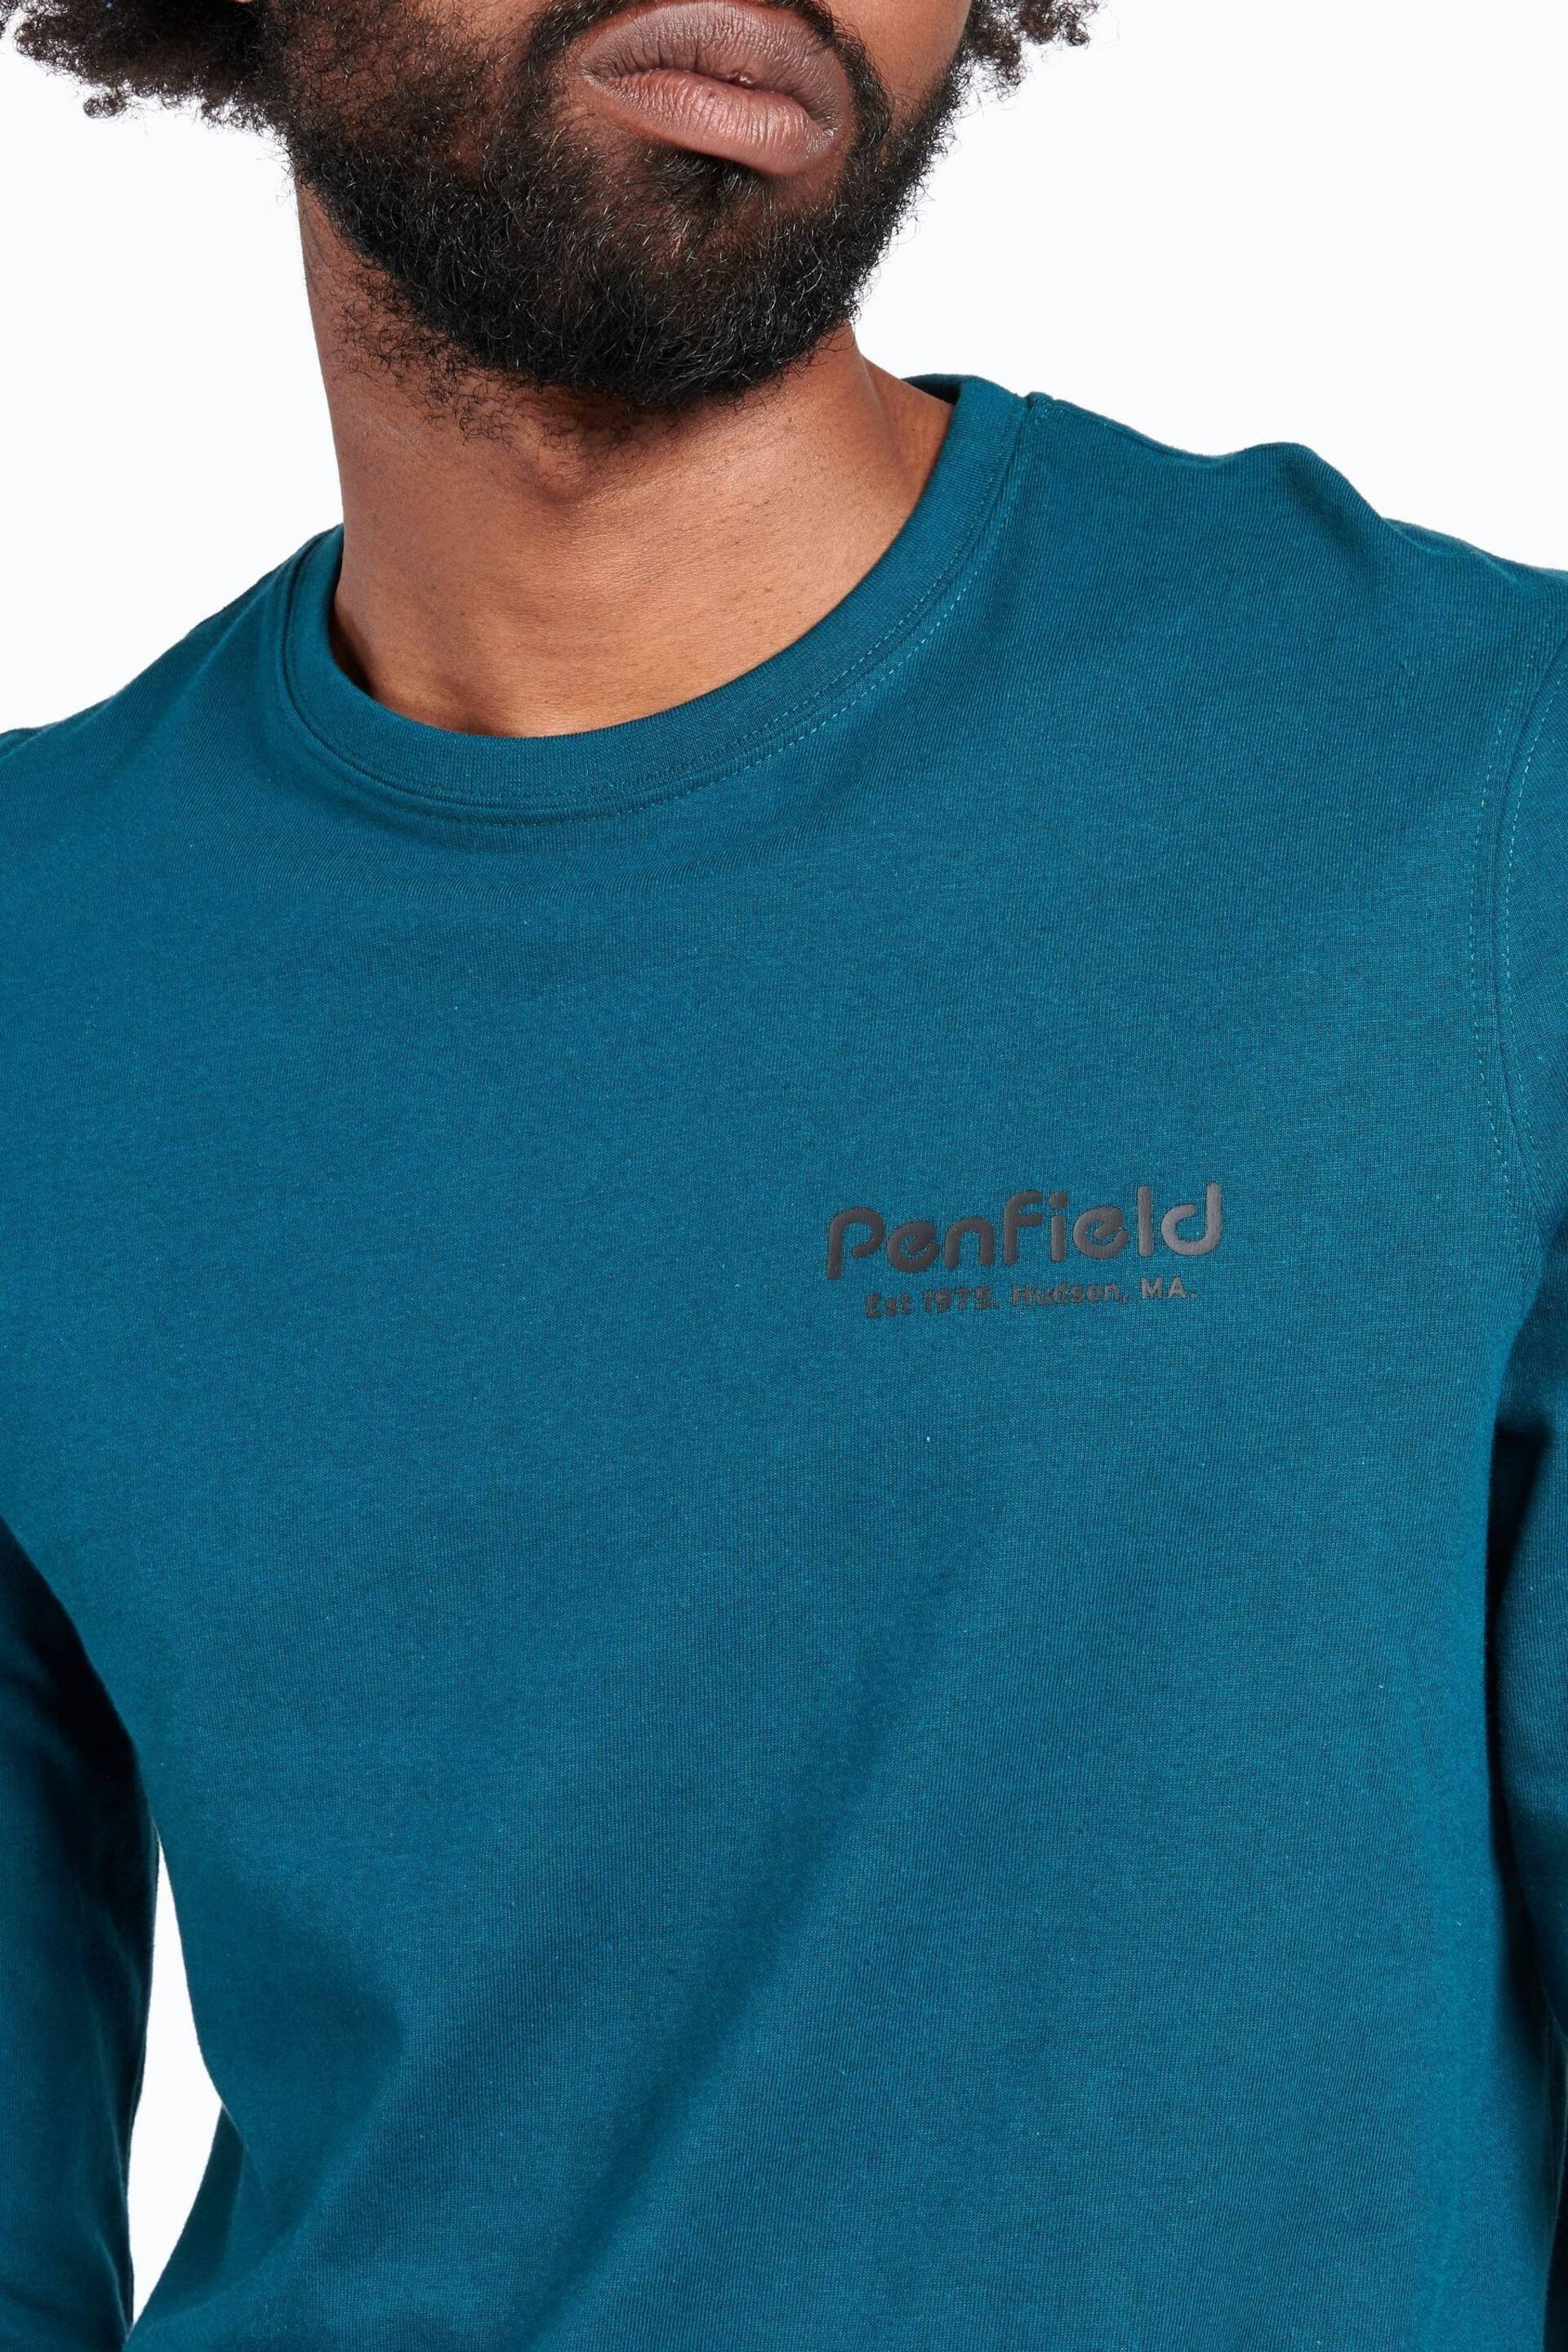 Penfield Blue Sketch Mountain Back Graphic Long-Sleeved T-Shirt - Image 3 of 7